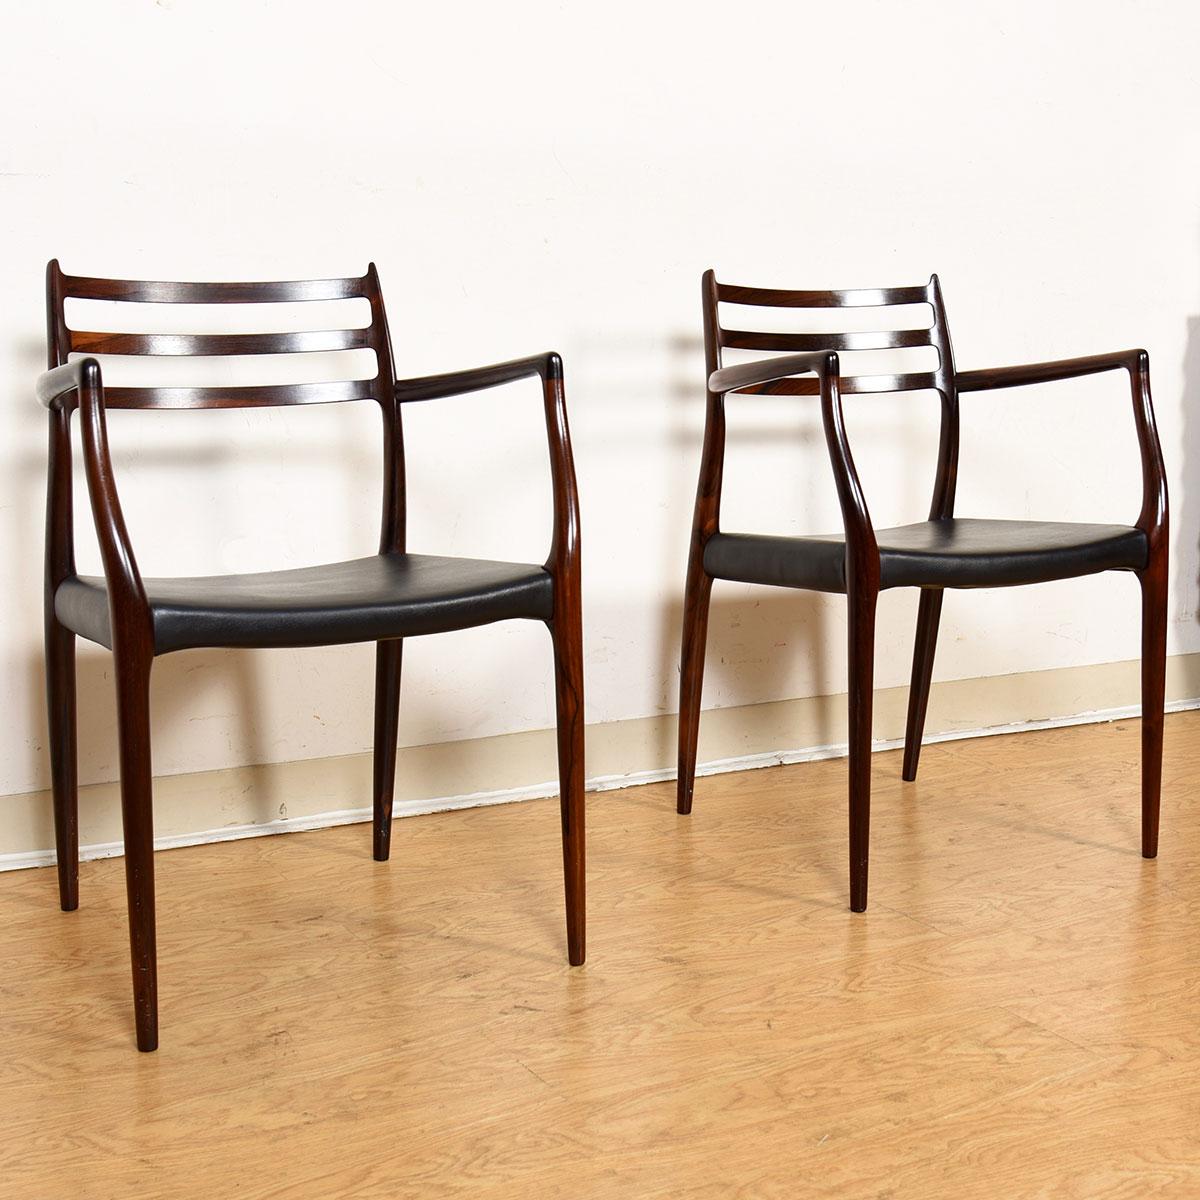 Pair of Moller Danish Horn Arm-Chairs #62 in Brazilian Rosewood In Good Condition For Sale In Kensington, MD